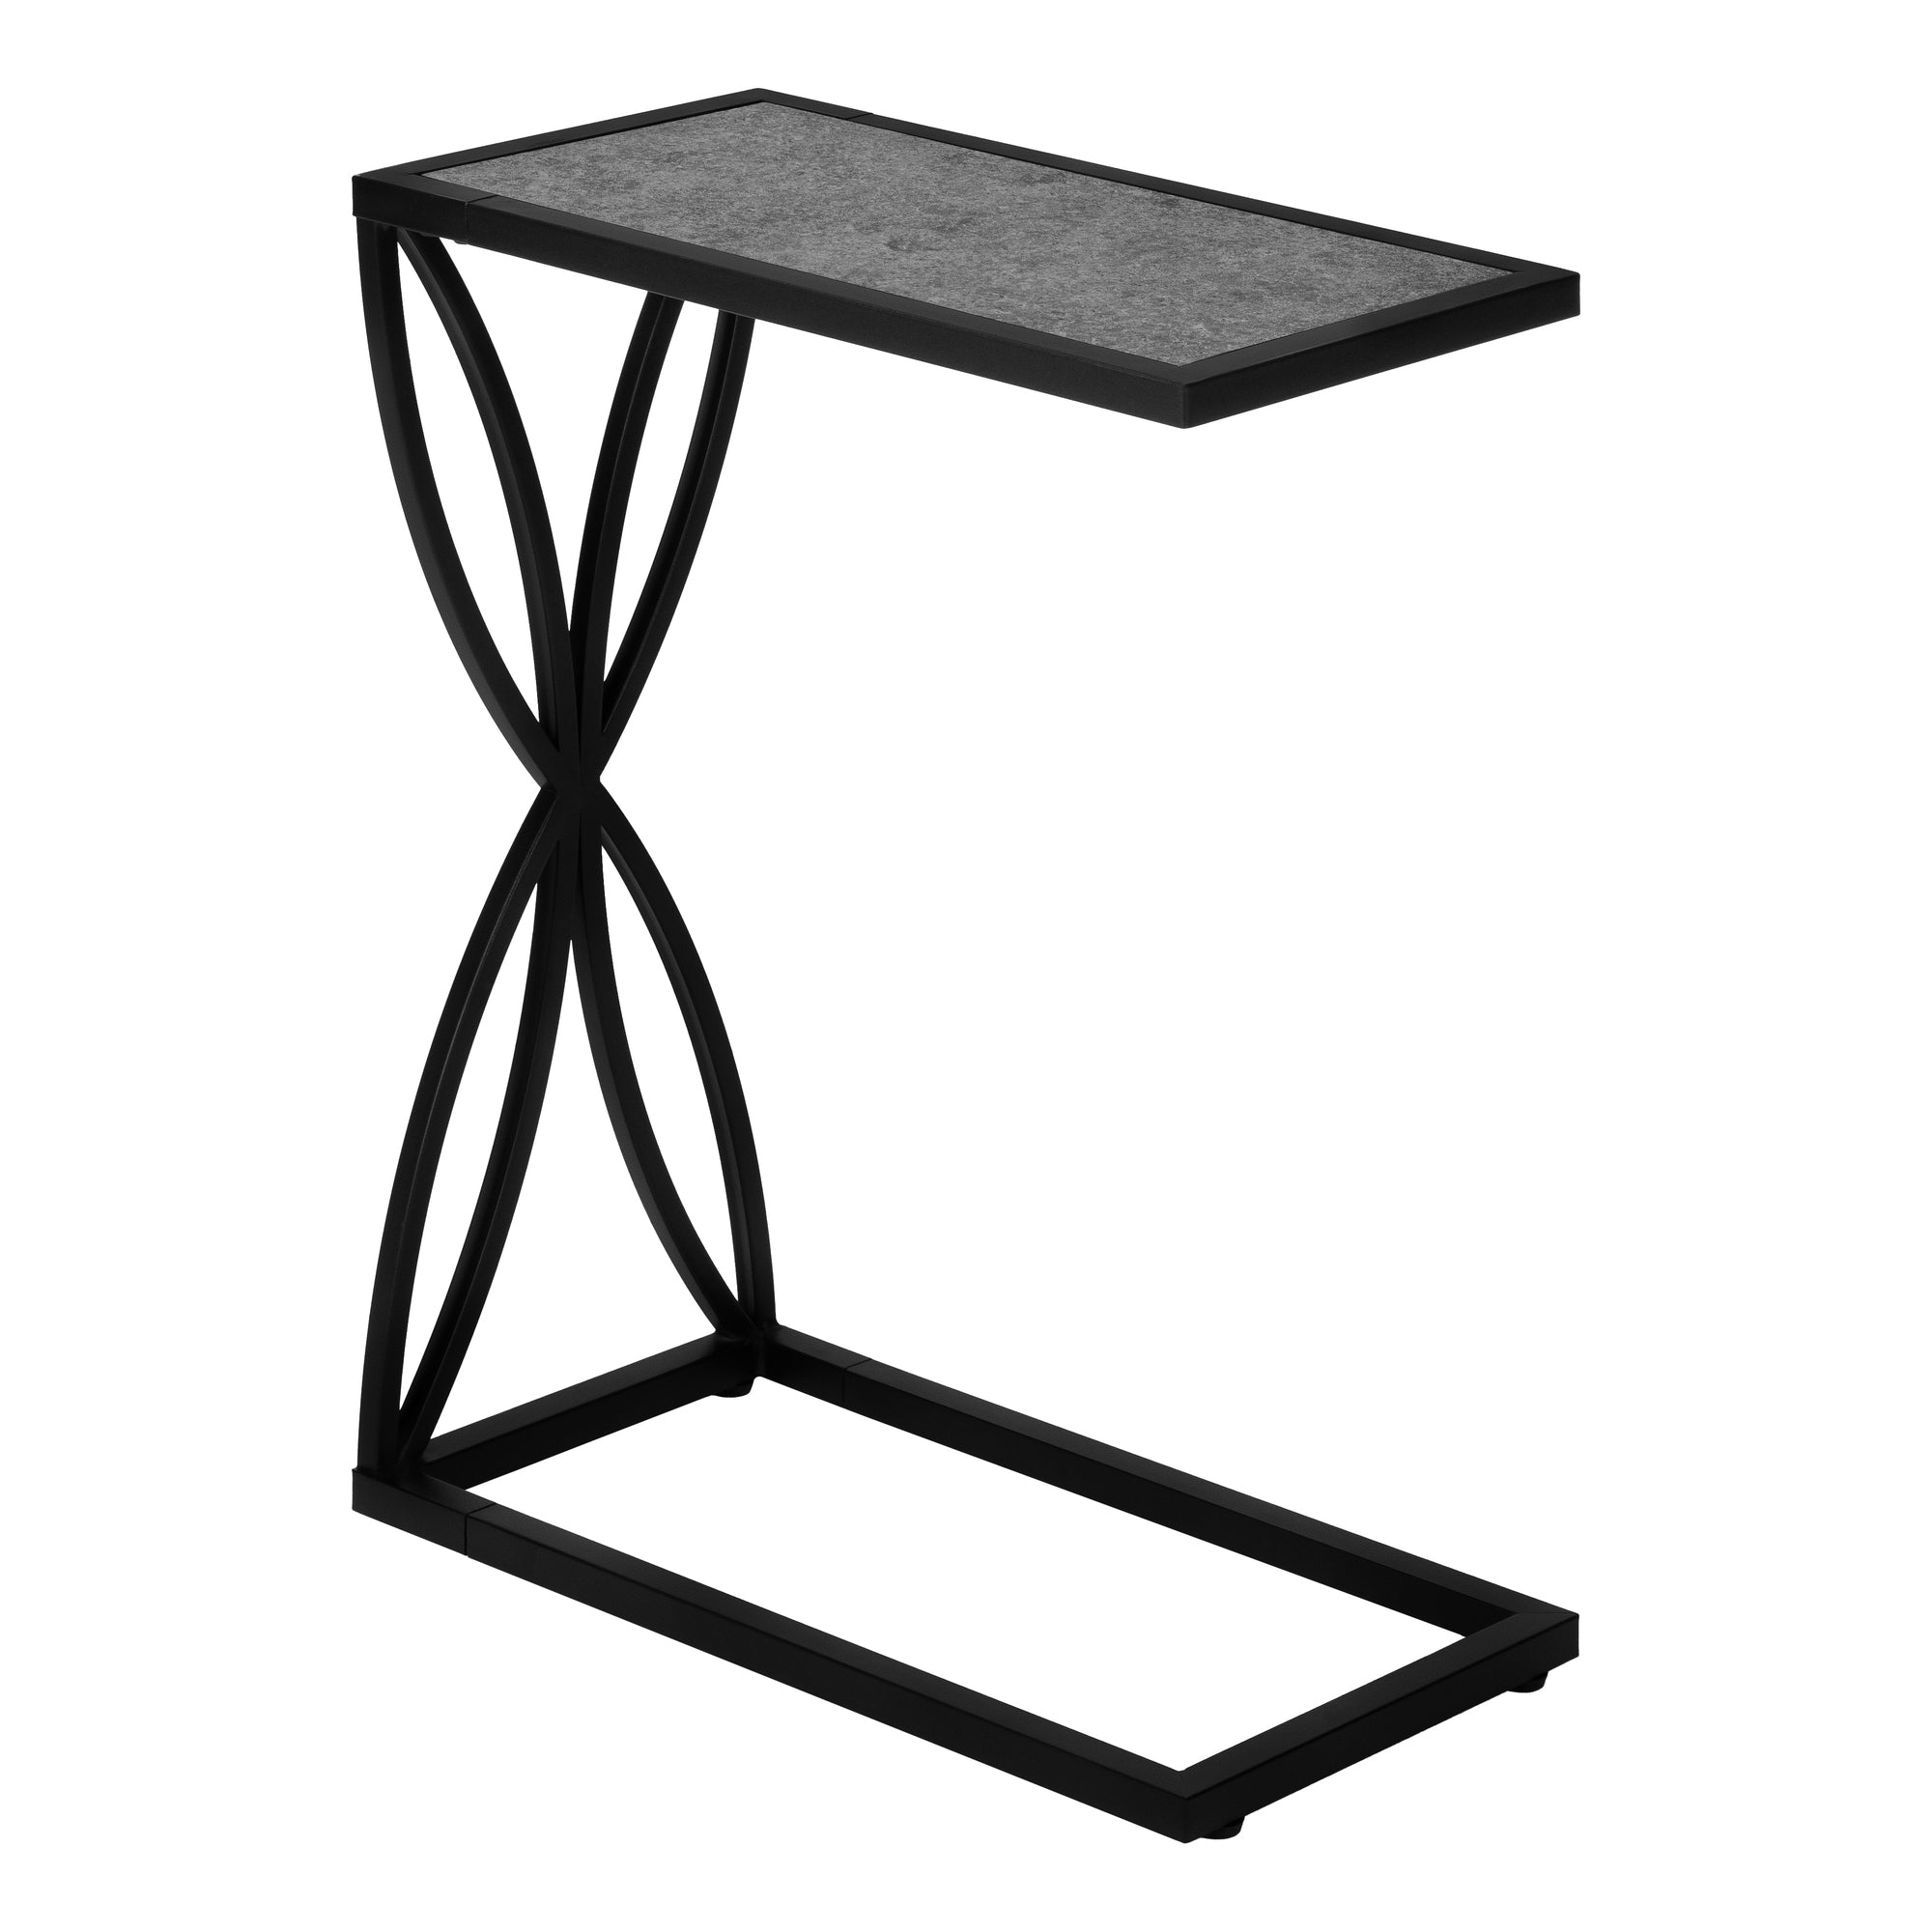 ACCENT TABLE - 25"H / GREY STONE-LOOK / BLACK METAL